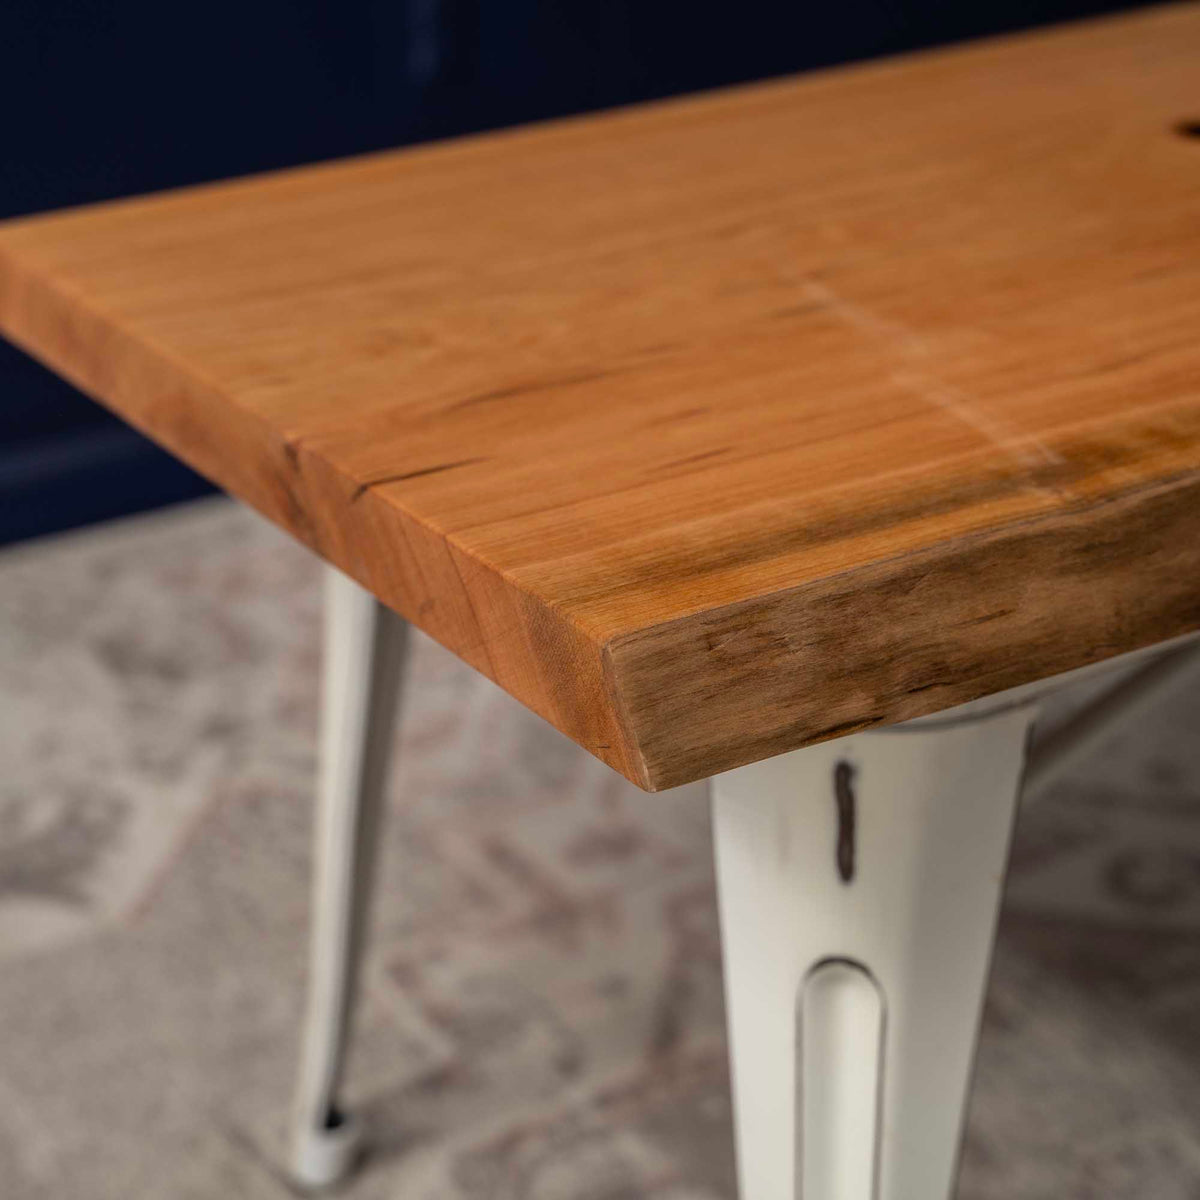 No 10. - 2” Finished Cherry Live Edge Slab Console Table Top Finished Sanded &amp; Oiled Console Coffee Table Desk Top Ready